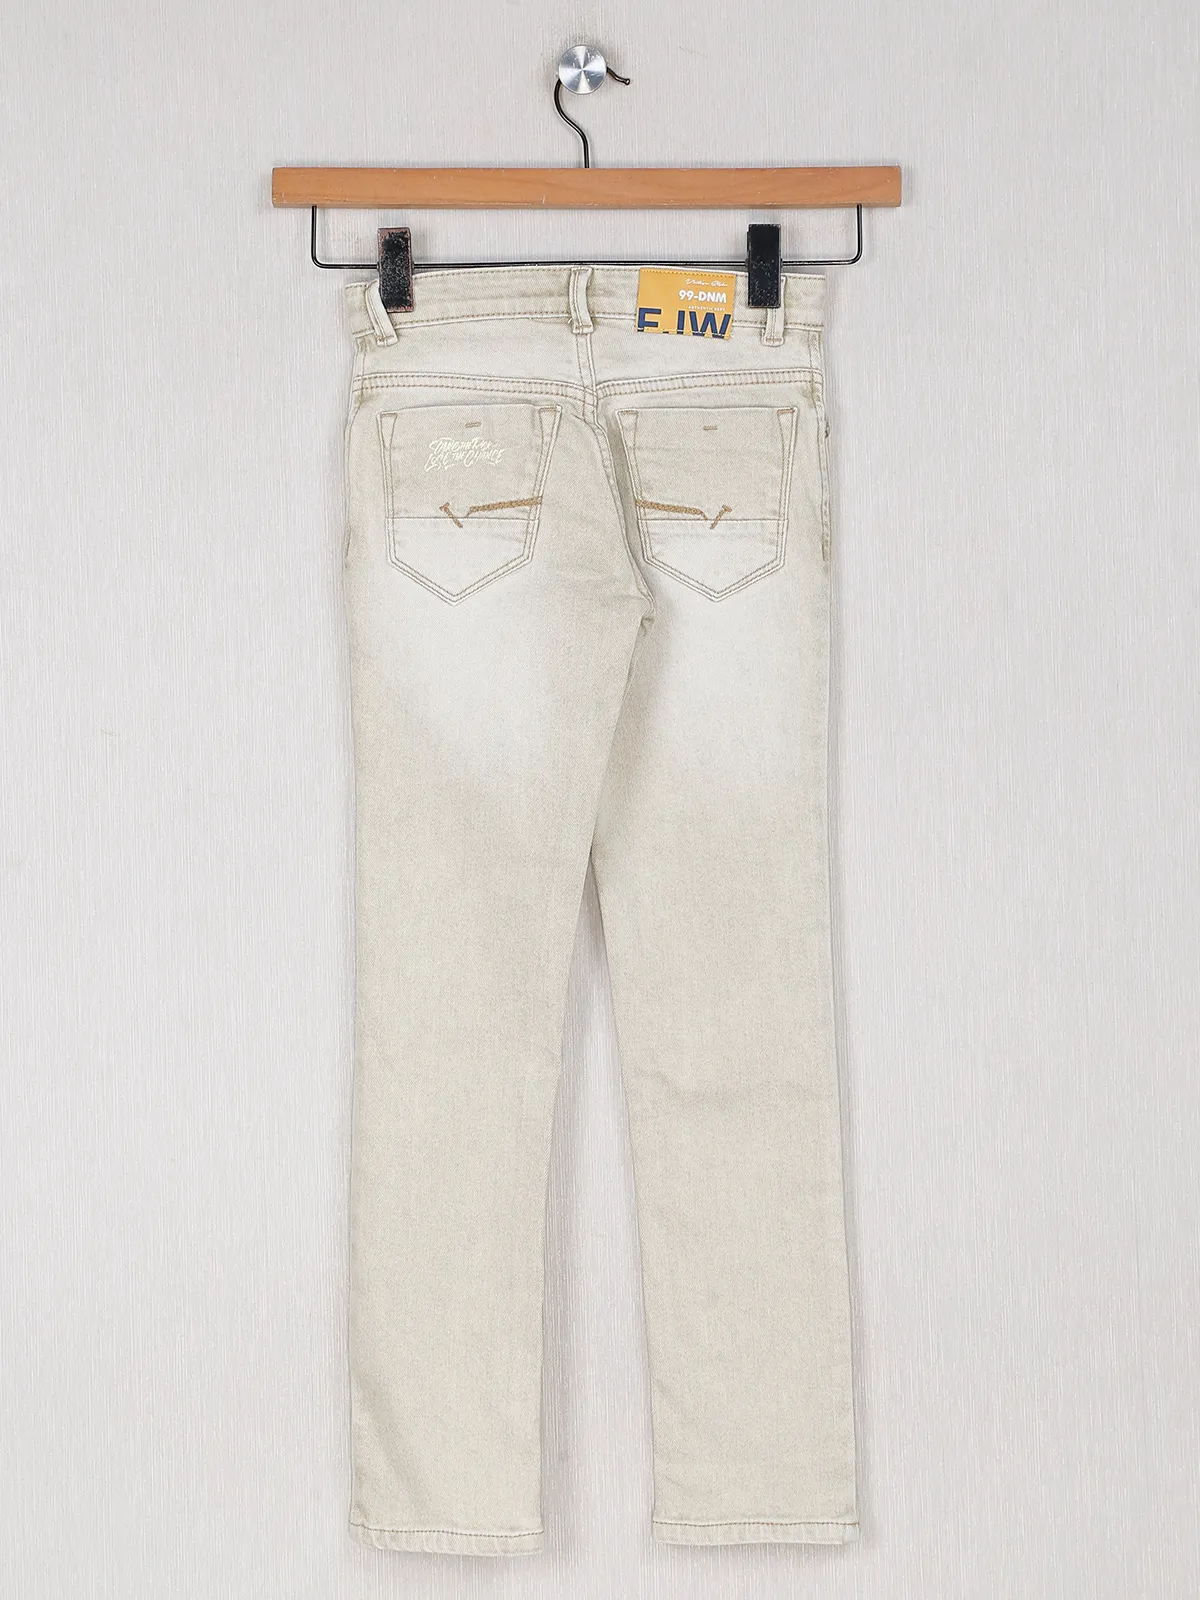 Forway cream ripped denim jeans